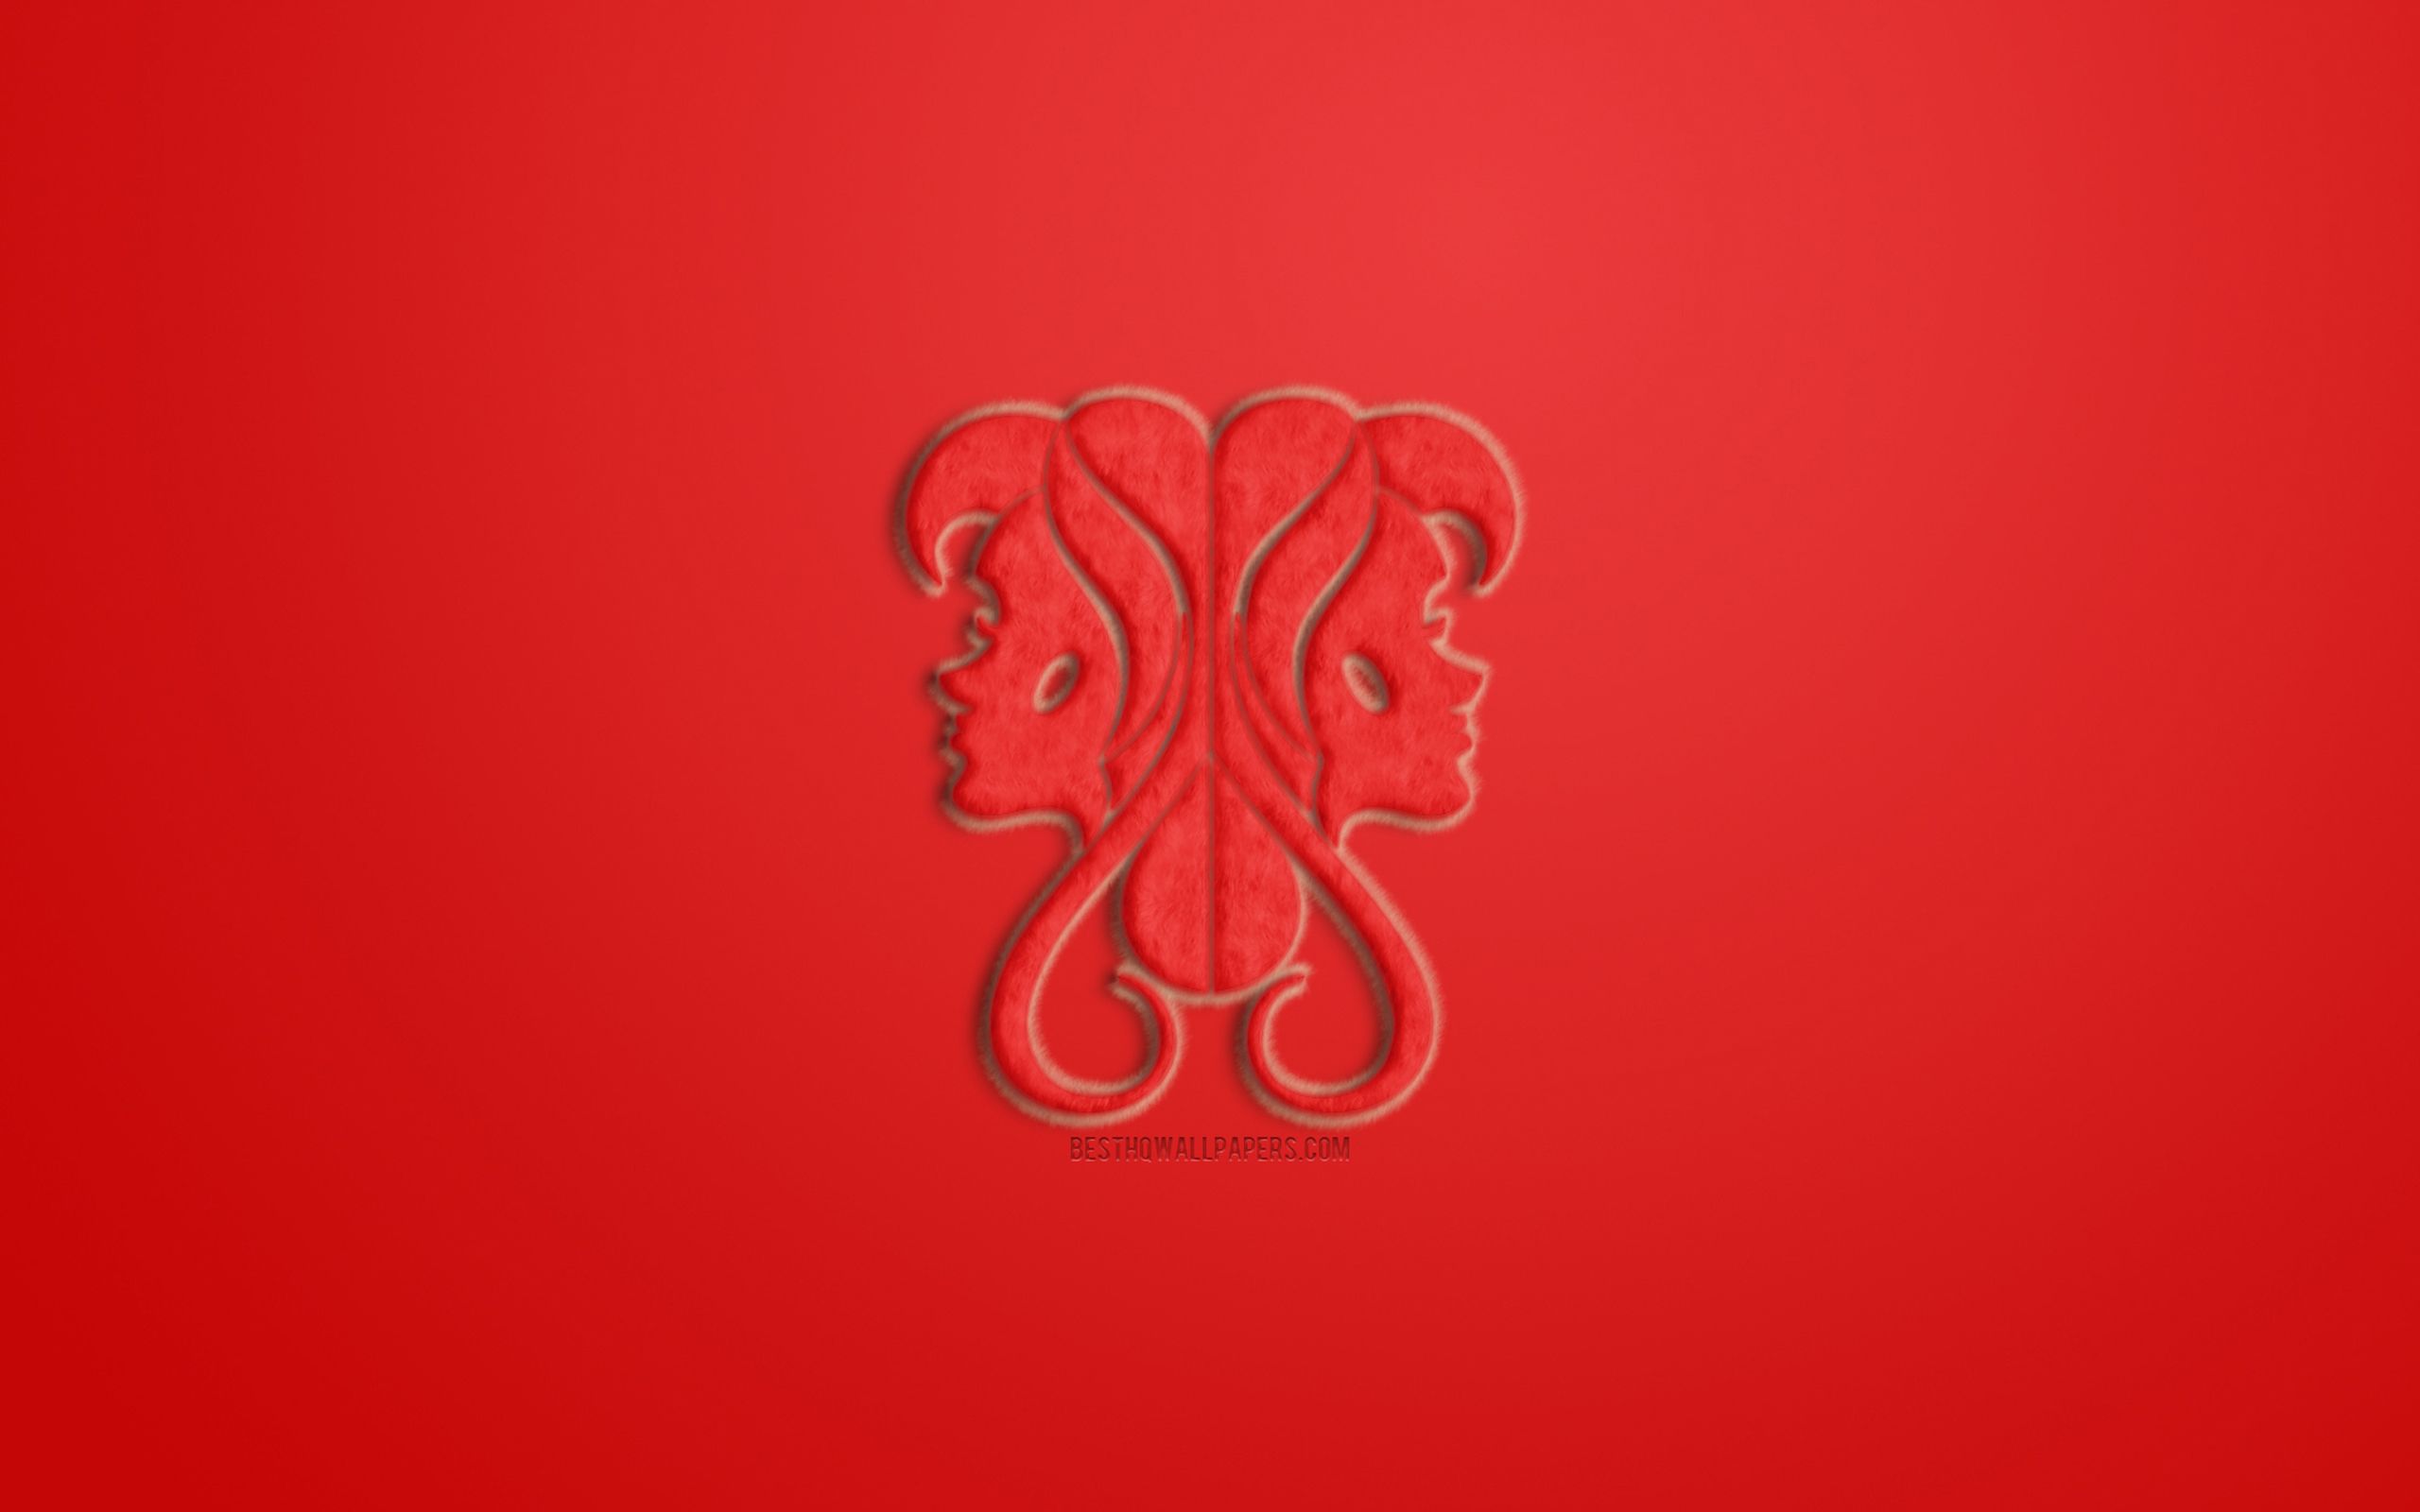 Download wallpaper Gemini Zodiac Sign, red fur sign, horoscope signs, zodiac signs, Gemini Sign, astrological sign, Gemini, red background for desktop with resolution 2560x1600. High Quality HD picture wallpaper